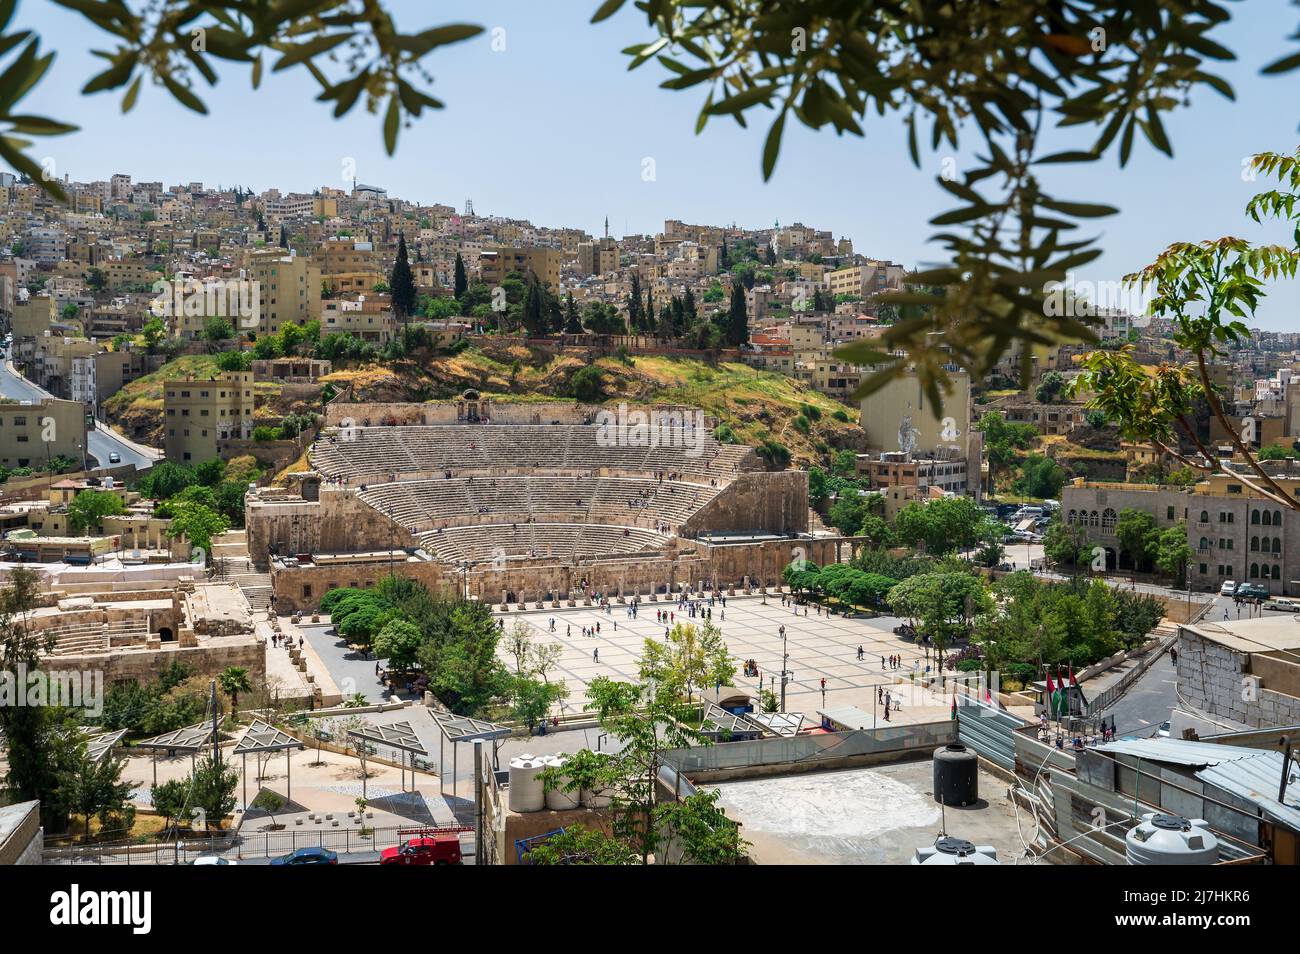 Amman downtown skyline in Jordan dominated by ancient Roman theater structure among residential houses in the old city center Stock Photo